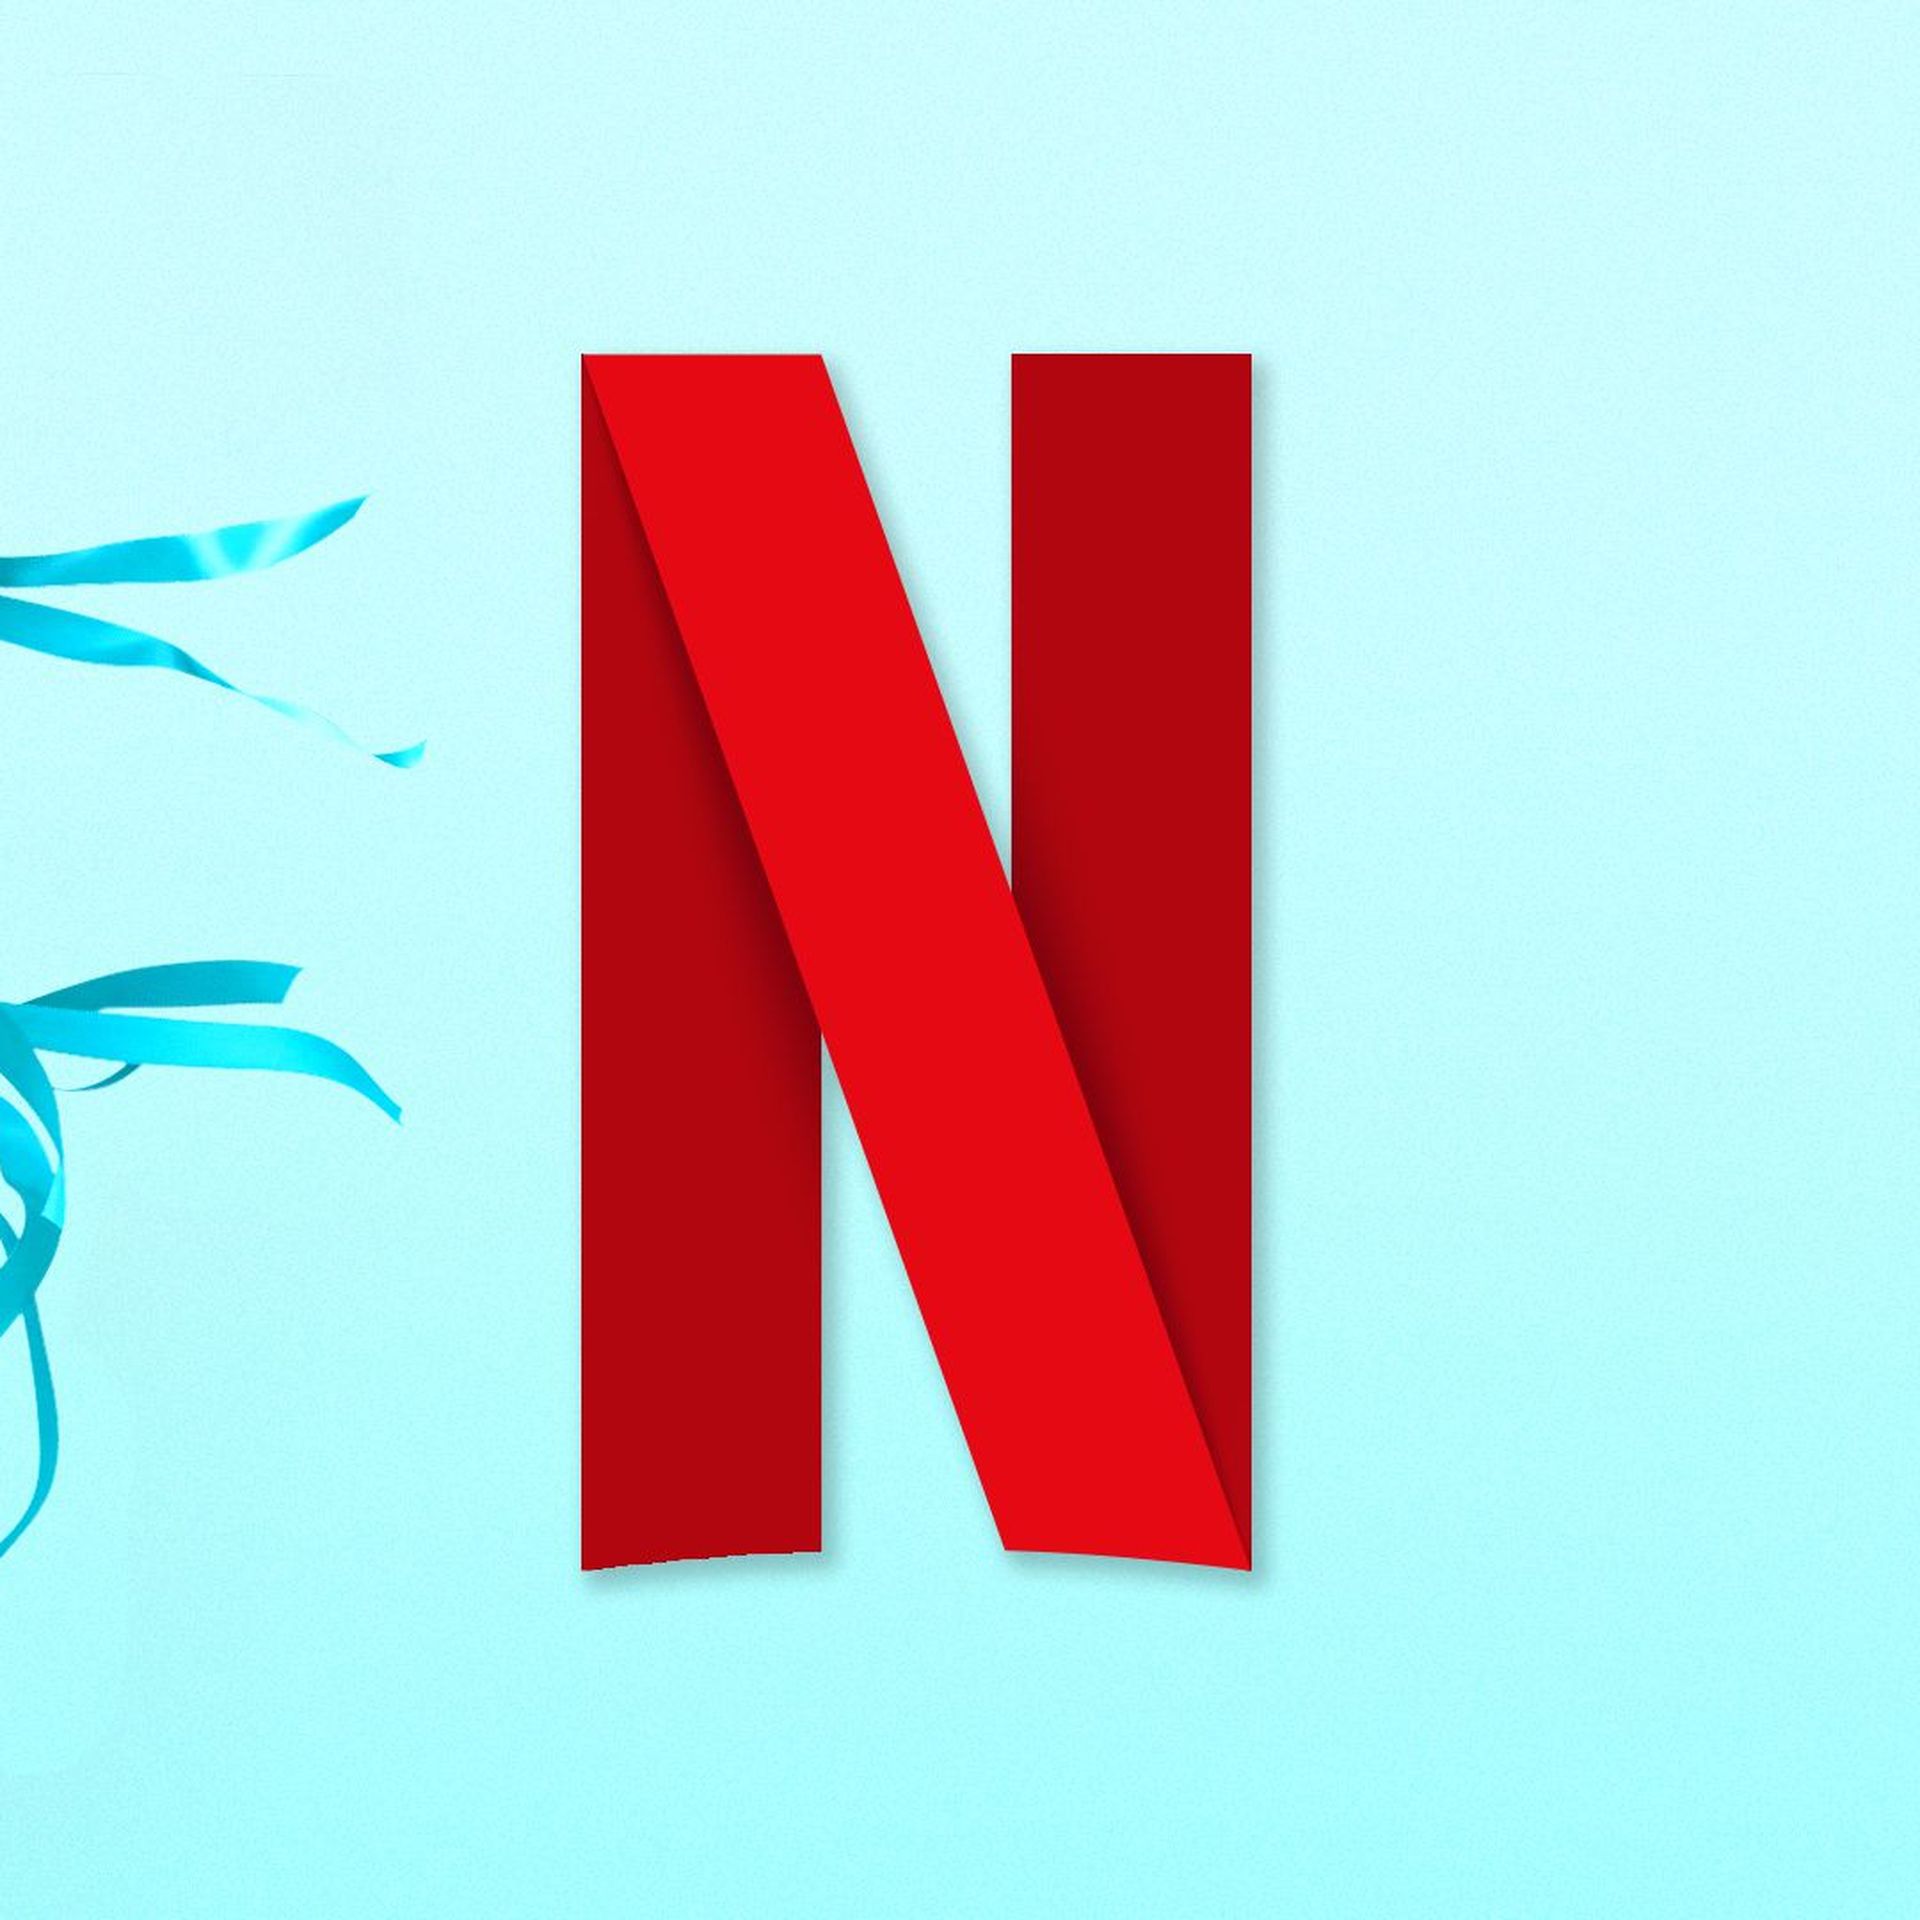 Illustration of a fan blowing cool air on the Netflix logo.